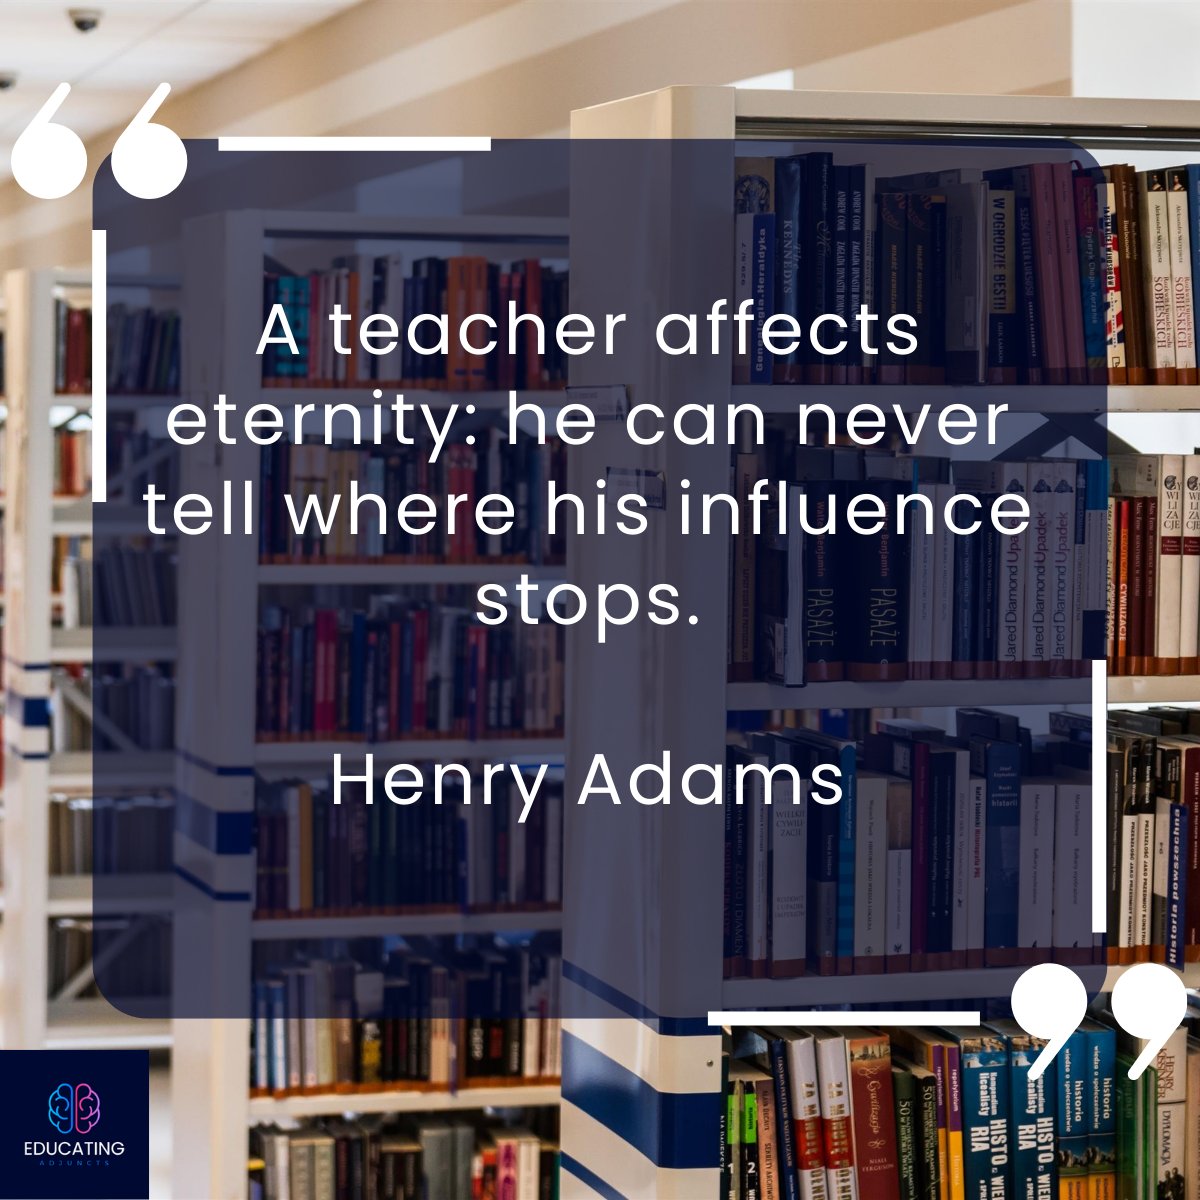 The impact of a teacher goes beyond the classroom, echoing through time. Their teachings mold minds, shape futures, and leave imprints that last a lifetime. Educators, remember, you're not just teaching subjects, you're influencing eternity. #TeacherImpact #EducationInspiration